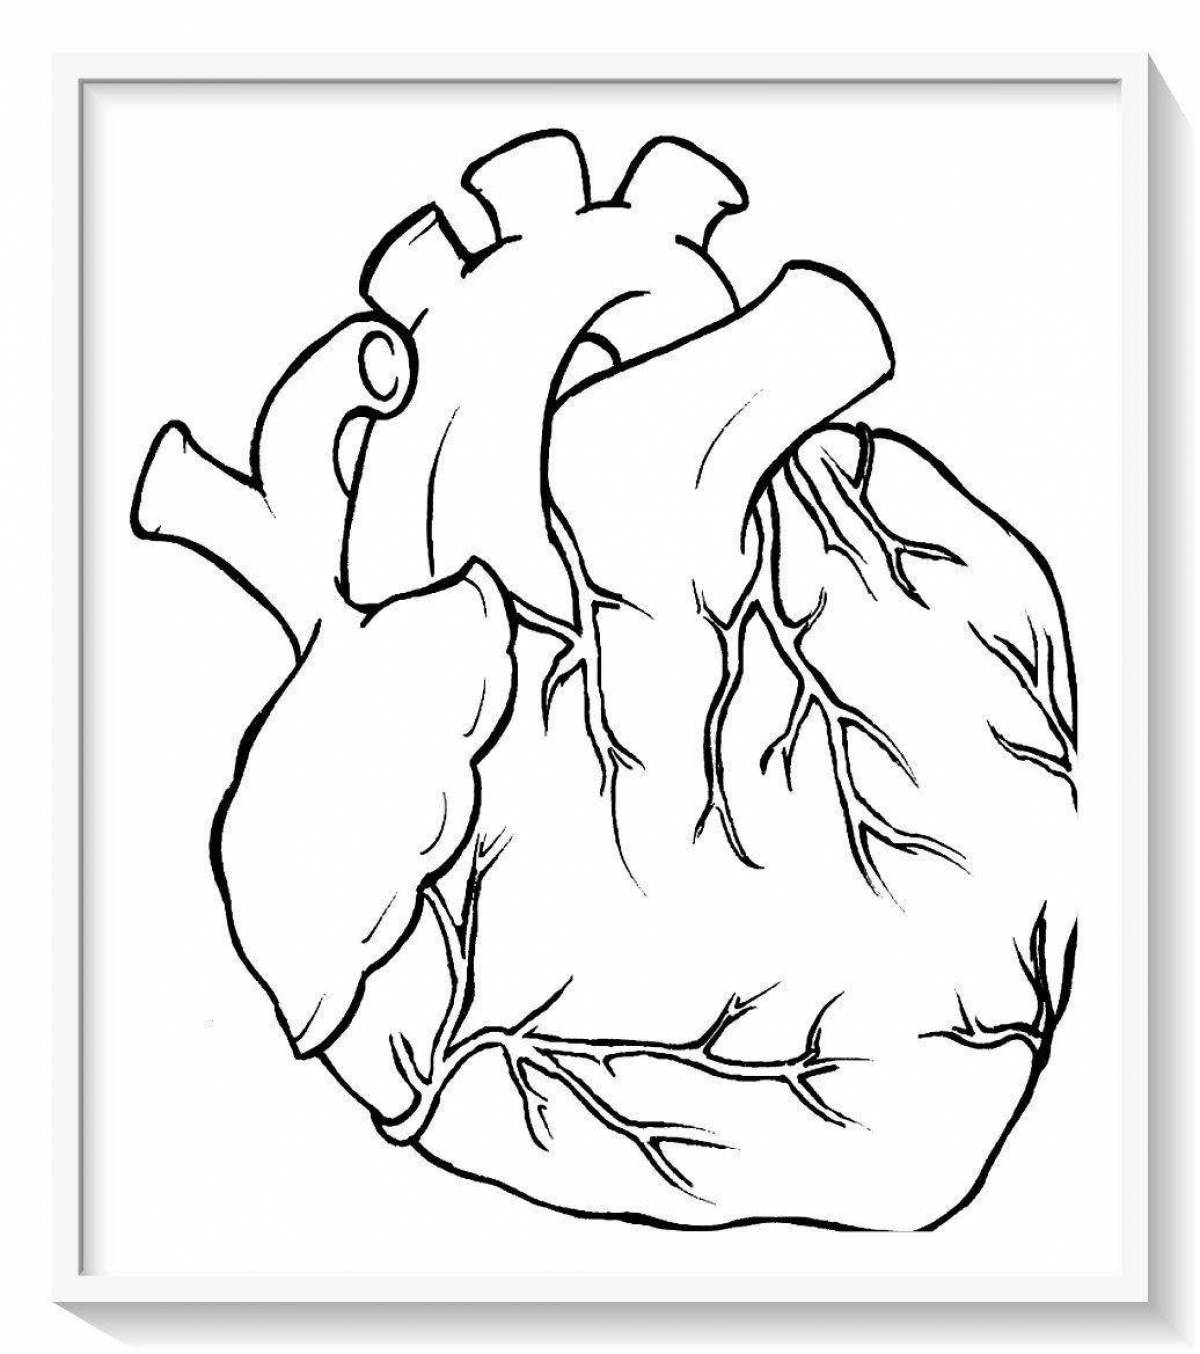 Coloring page graceful human heart